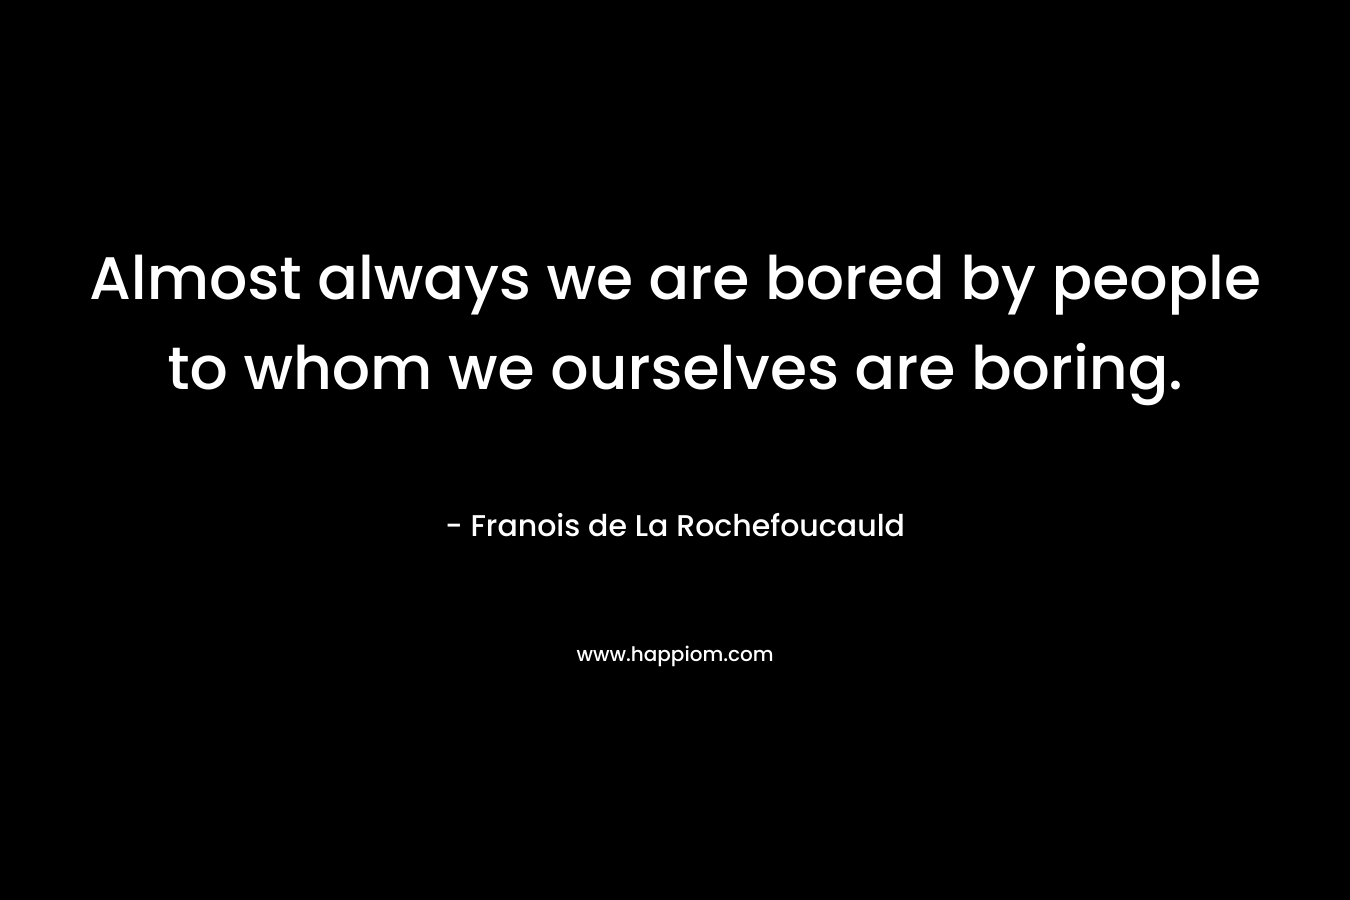 Almost always we are bored by people to whom we ourselves are boring.